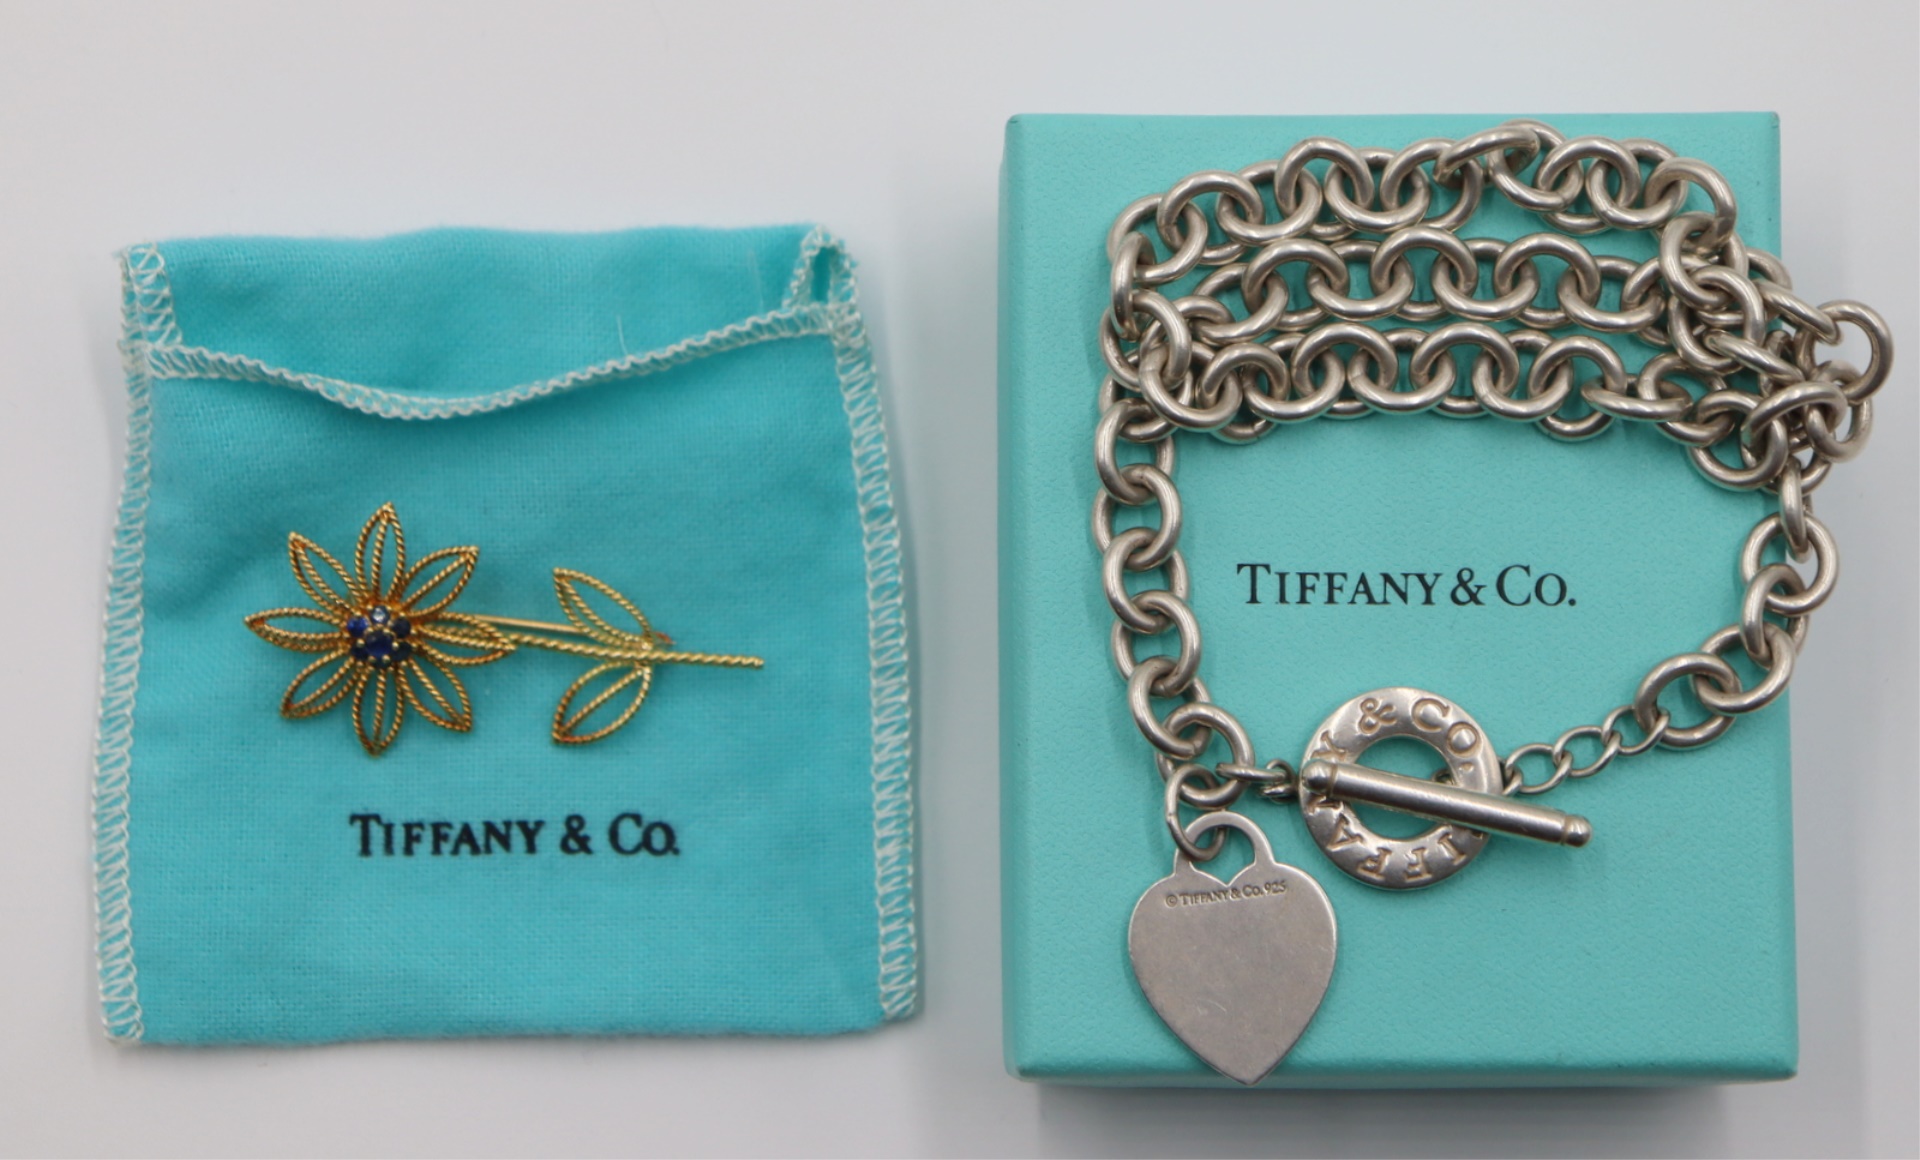 JEWELRY. TIFFANY & CO. GOLD & STERLING